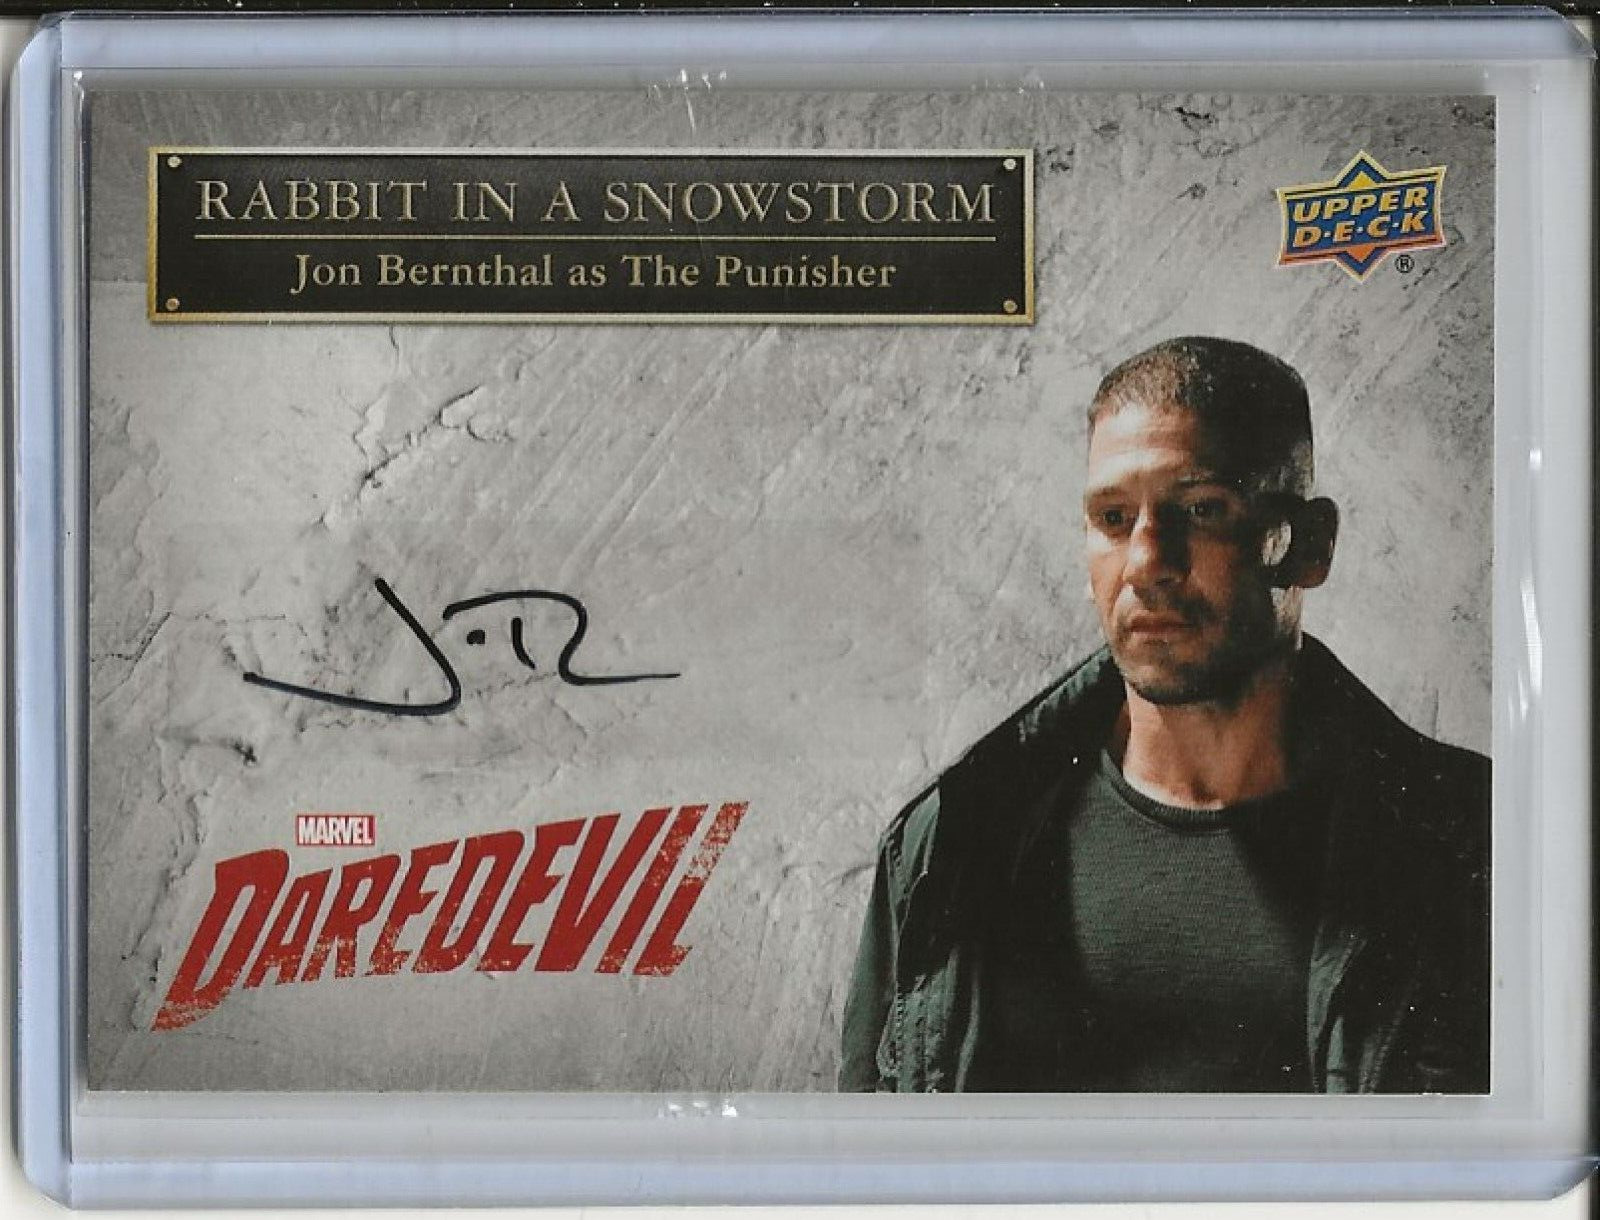 2018 UD Marvel Daredevil Auto Autograph Jon Bernthal as The Punisher SS-PN